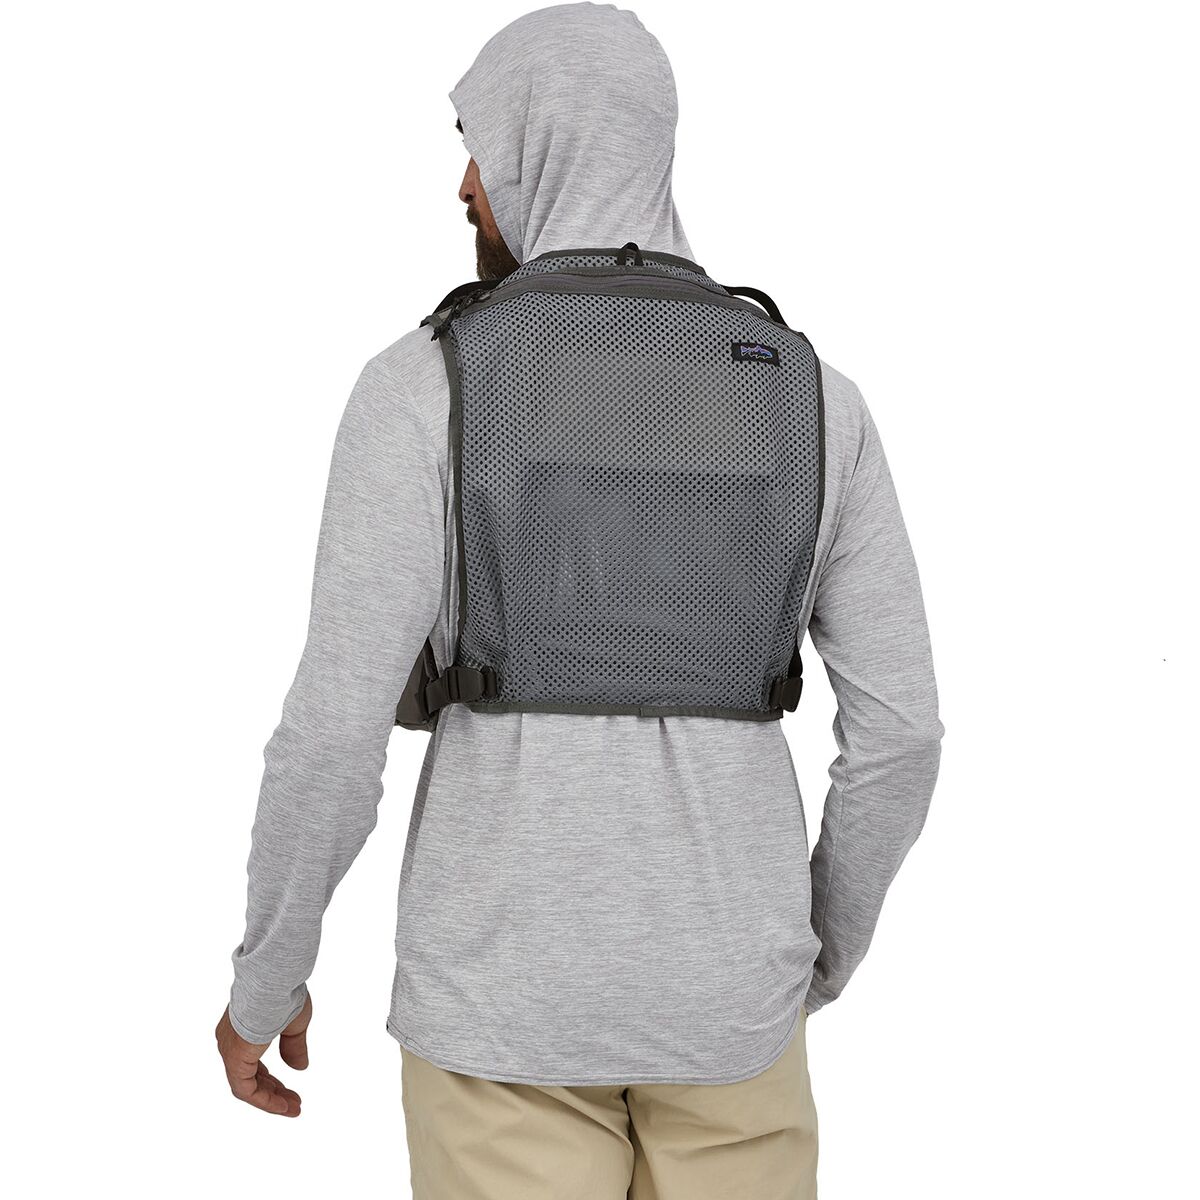 Patagonia Stealth Convertible Vest - Fly Fishing